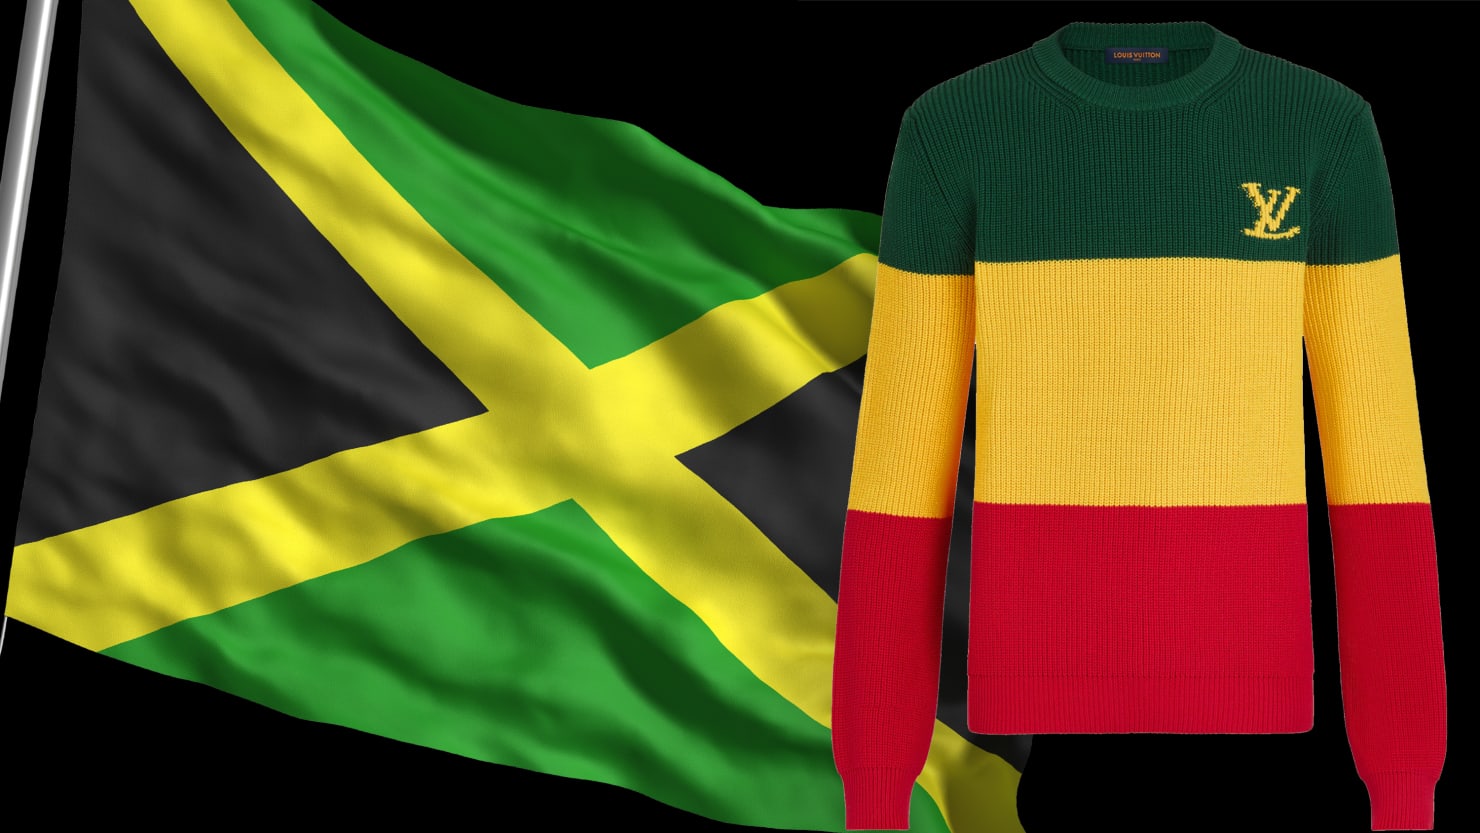 Louis Vuitton pays homage to the Jamaican flag, but gets the